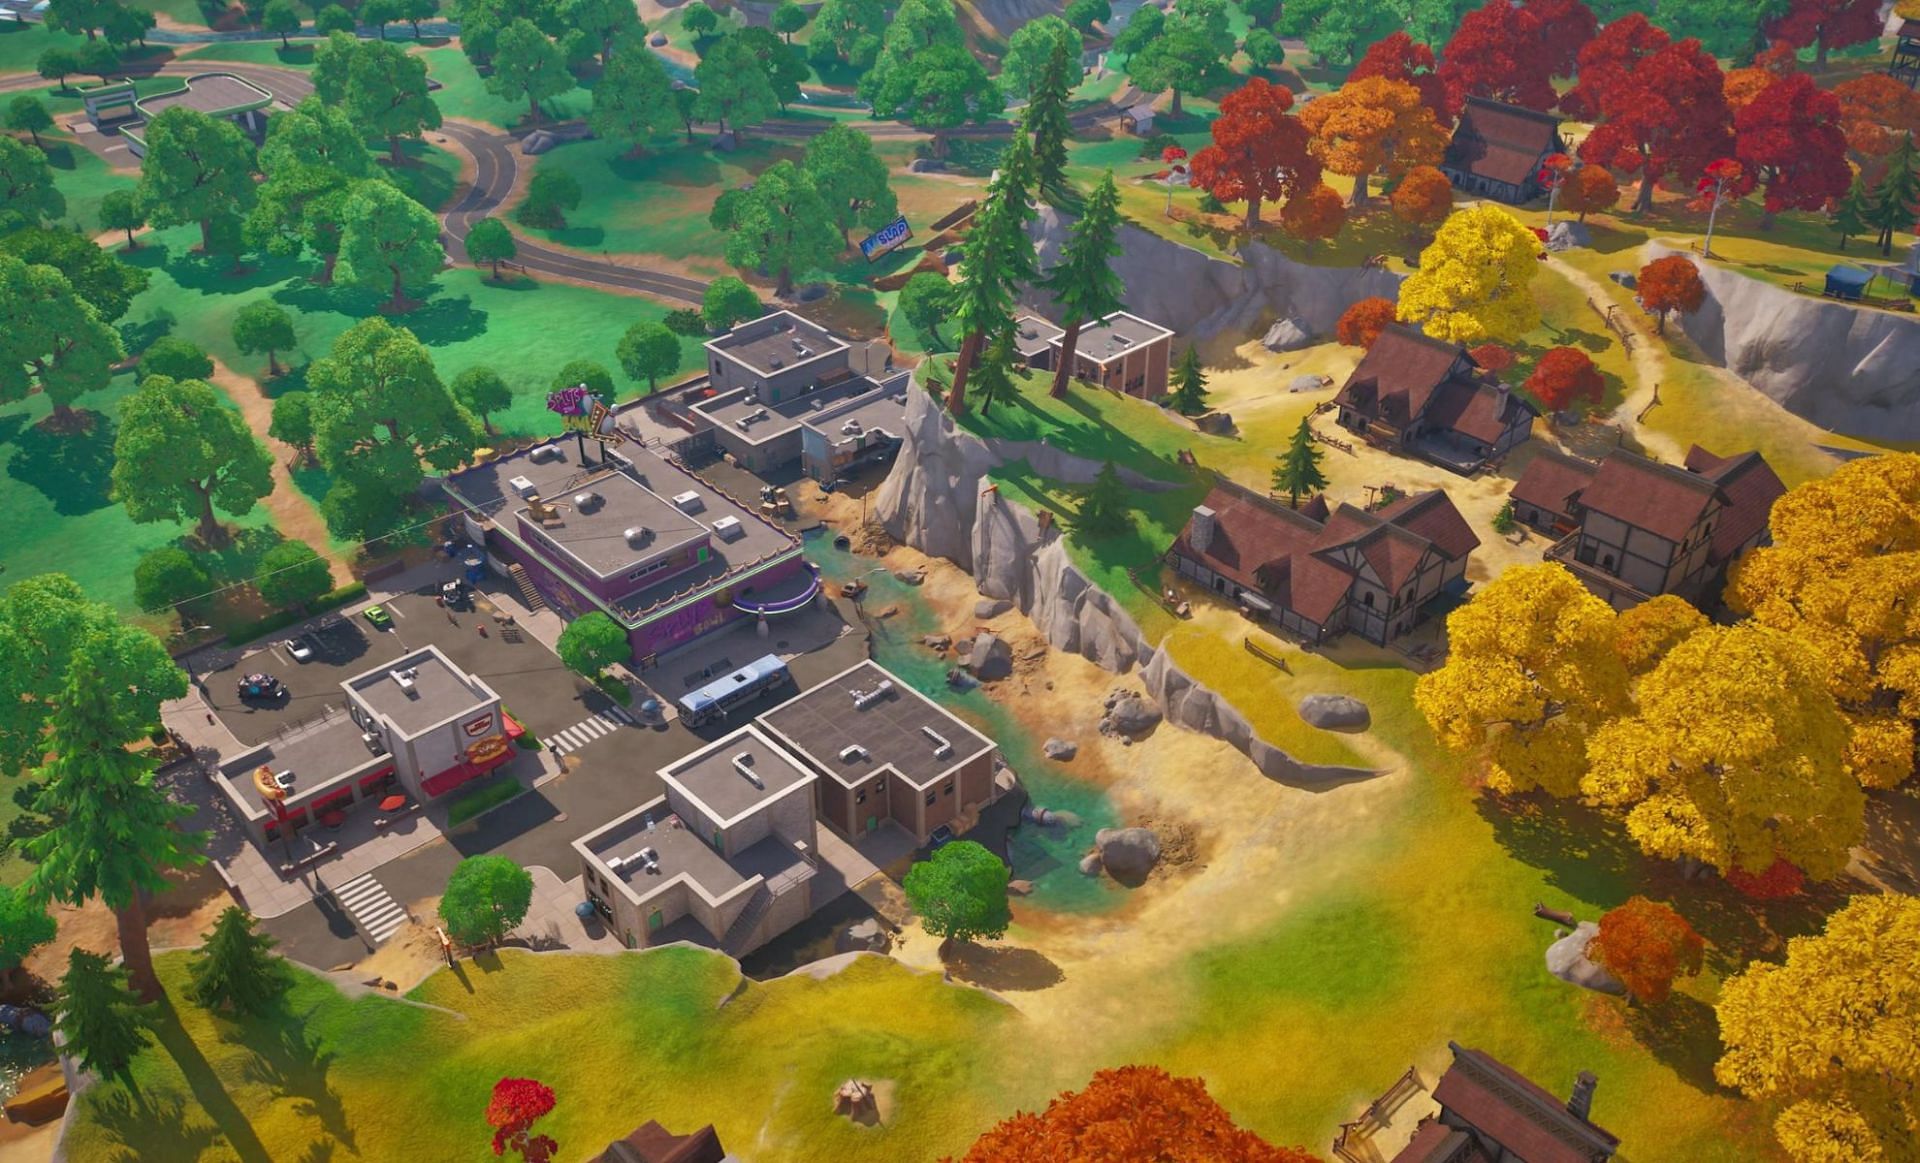 Faulty Splits is the POI to visit (Image via Fortnite Wiki)